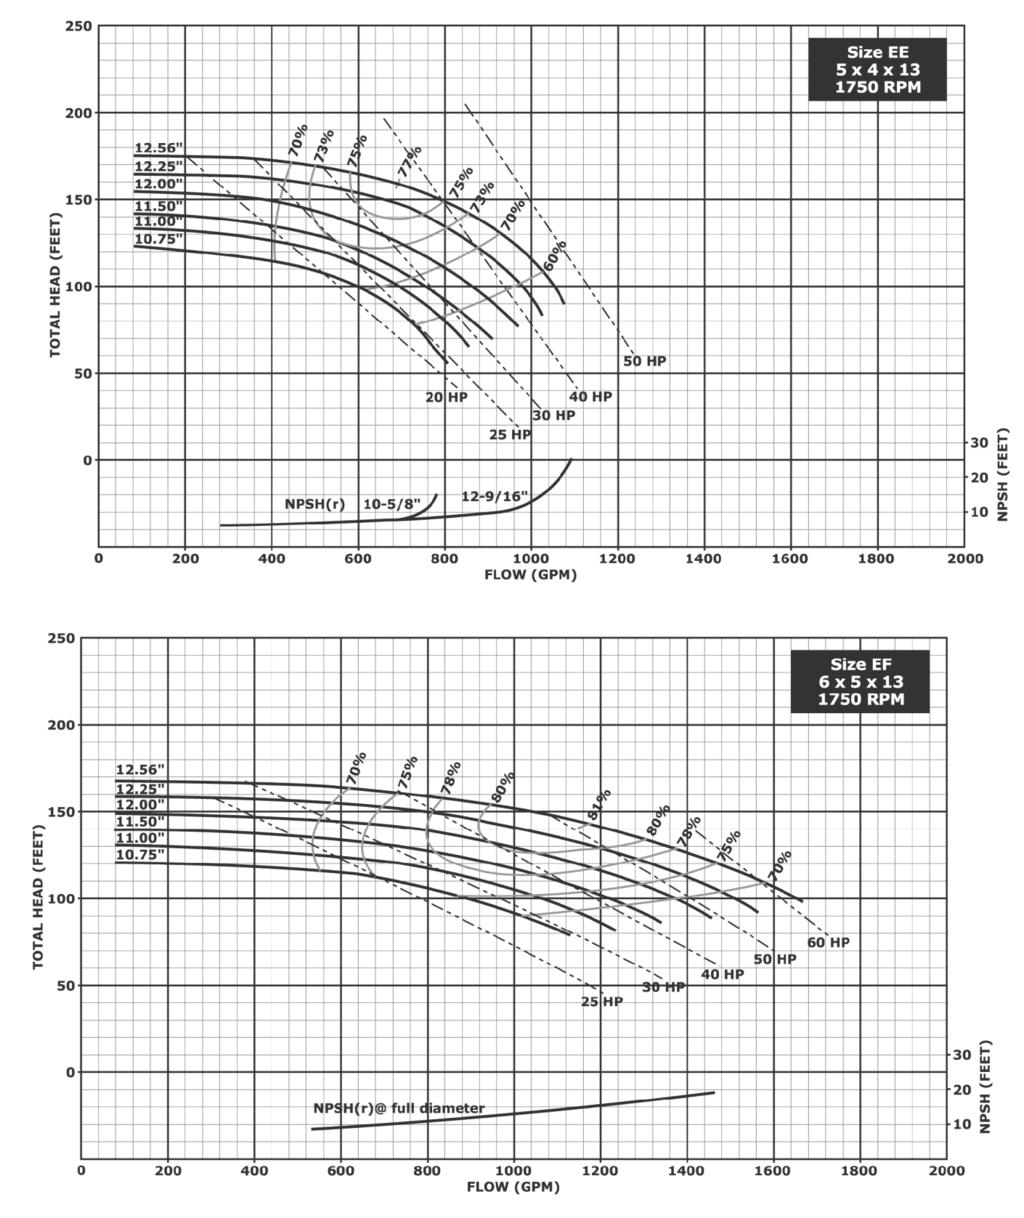 Hydraulic Performance - 13 Inch Impellers Size EE 6 x 4 x 13 1750 RPM Notes: 1. Above data is based on 1.0 sp. gr.